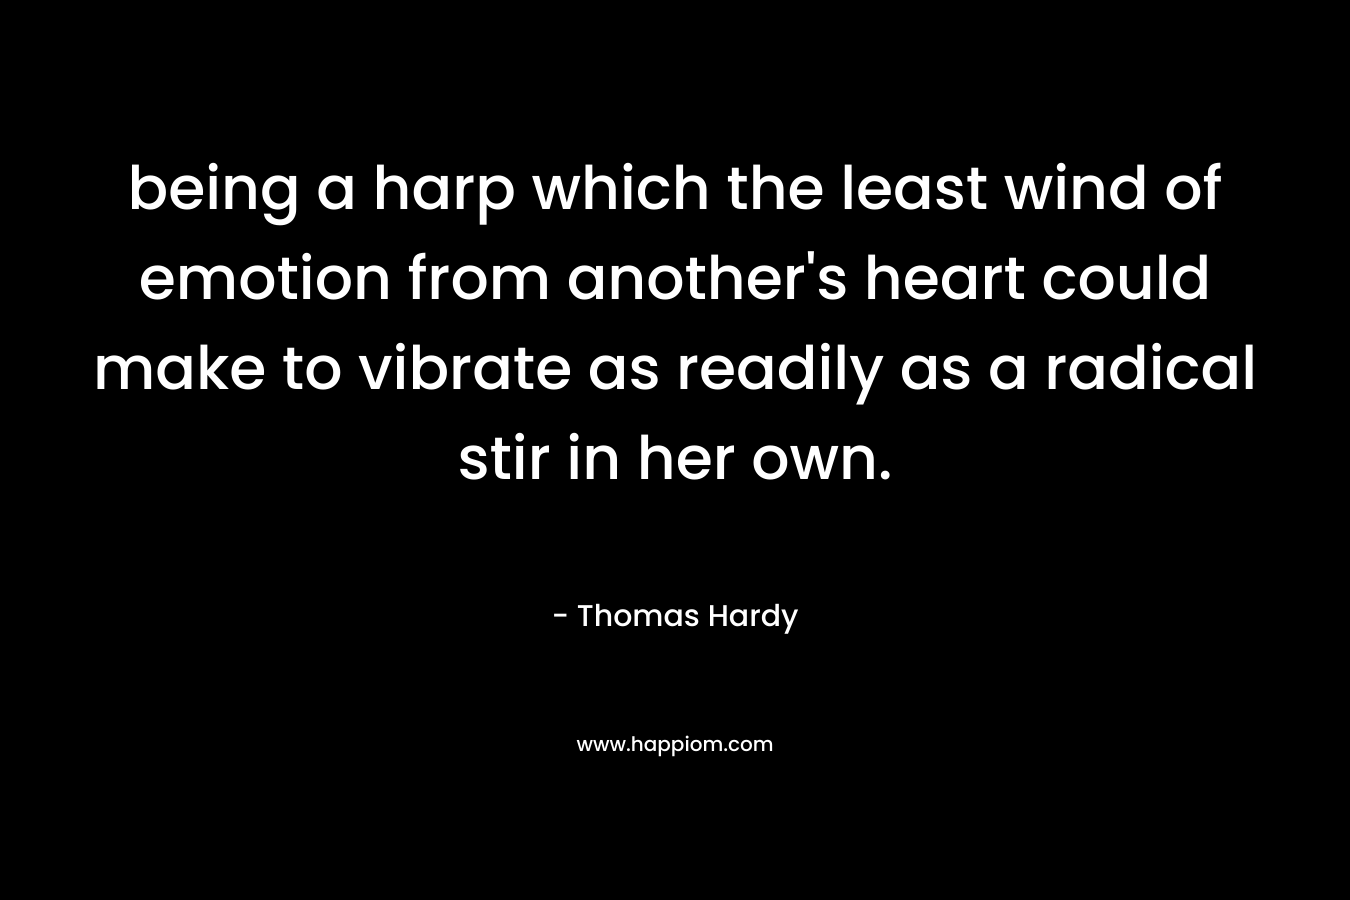 being a harp which the least wind of emotion from another's heart could make to vibrate as readily as a radical stir in her own.